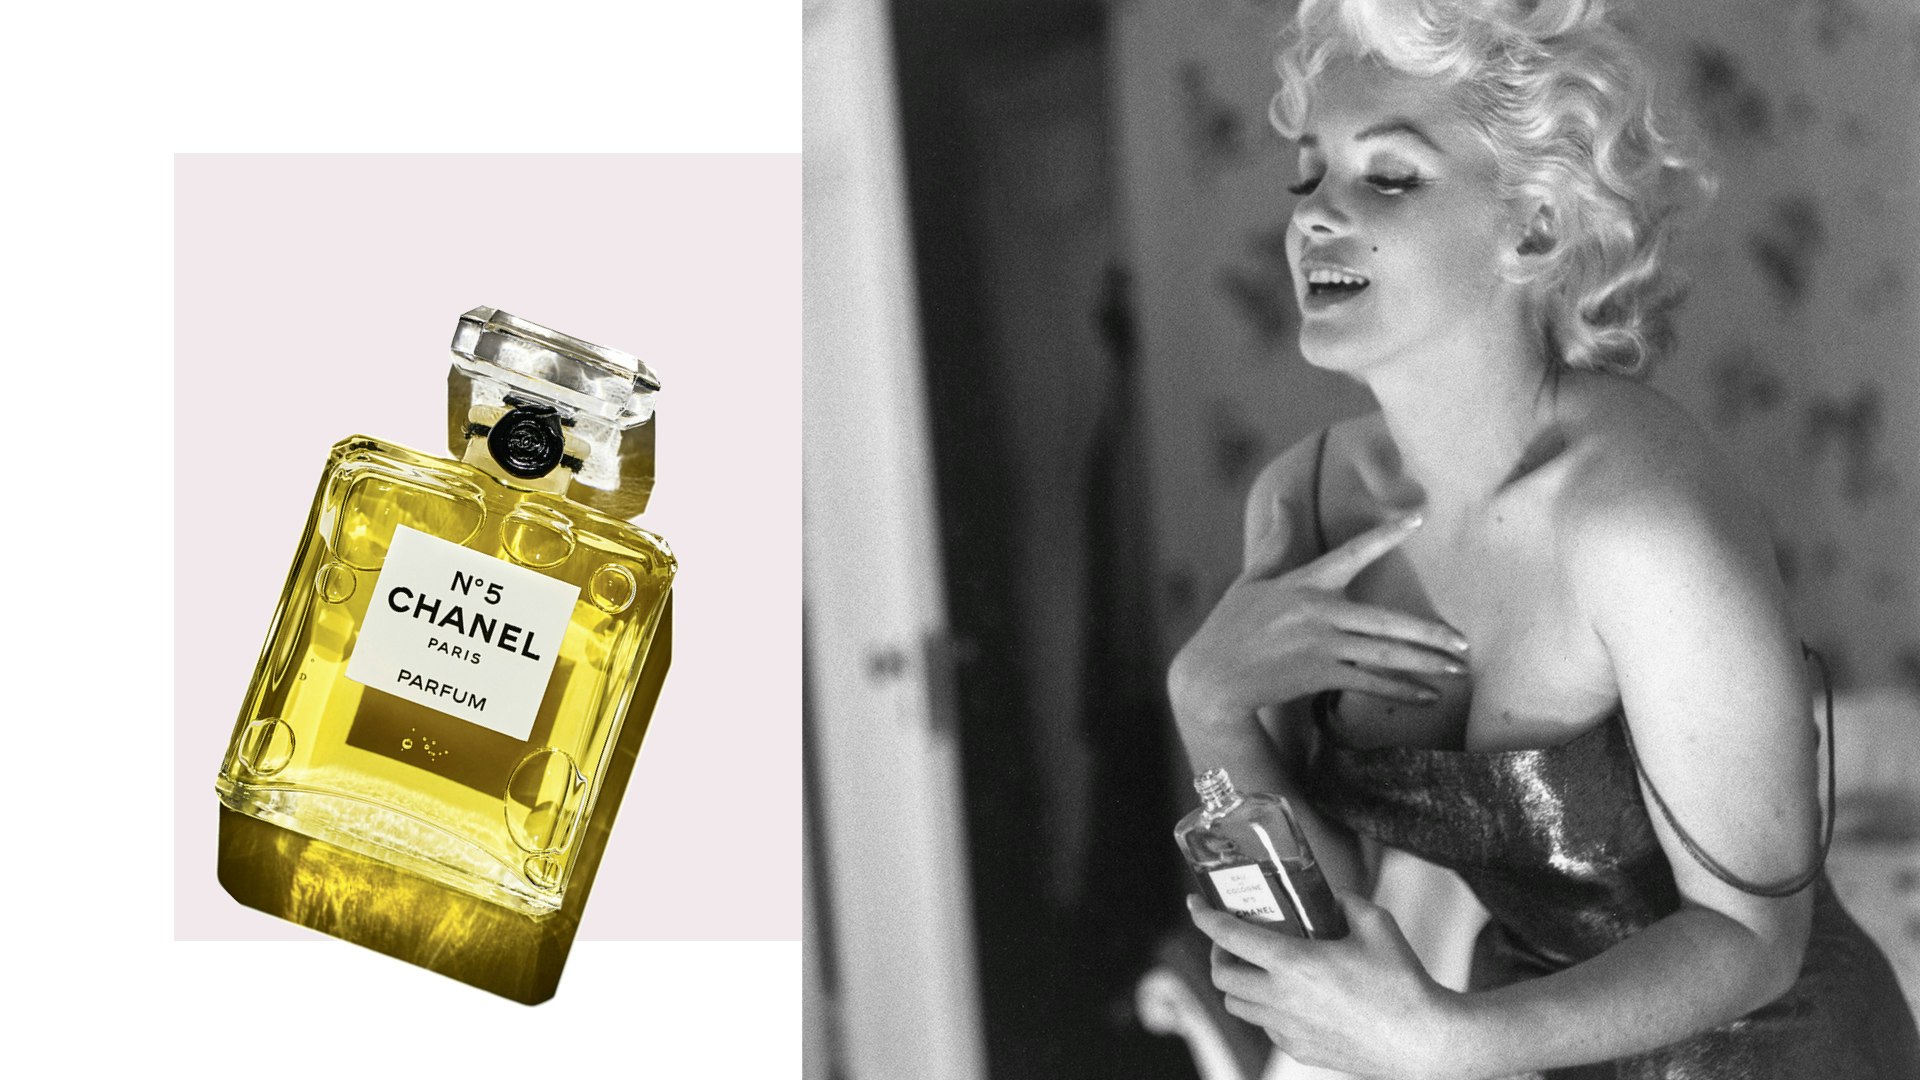 Marilyn Monroe, the new face of Chanel No. 5